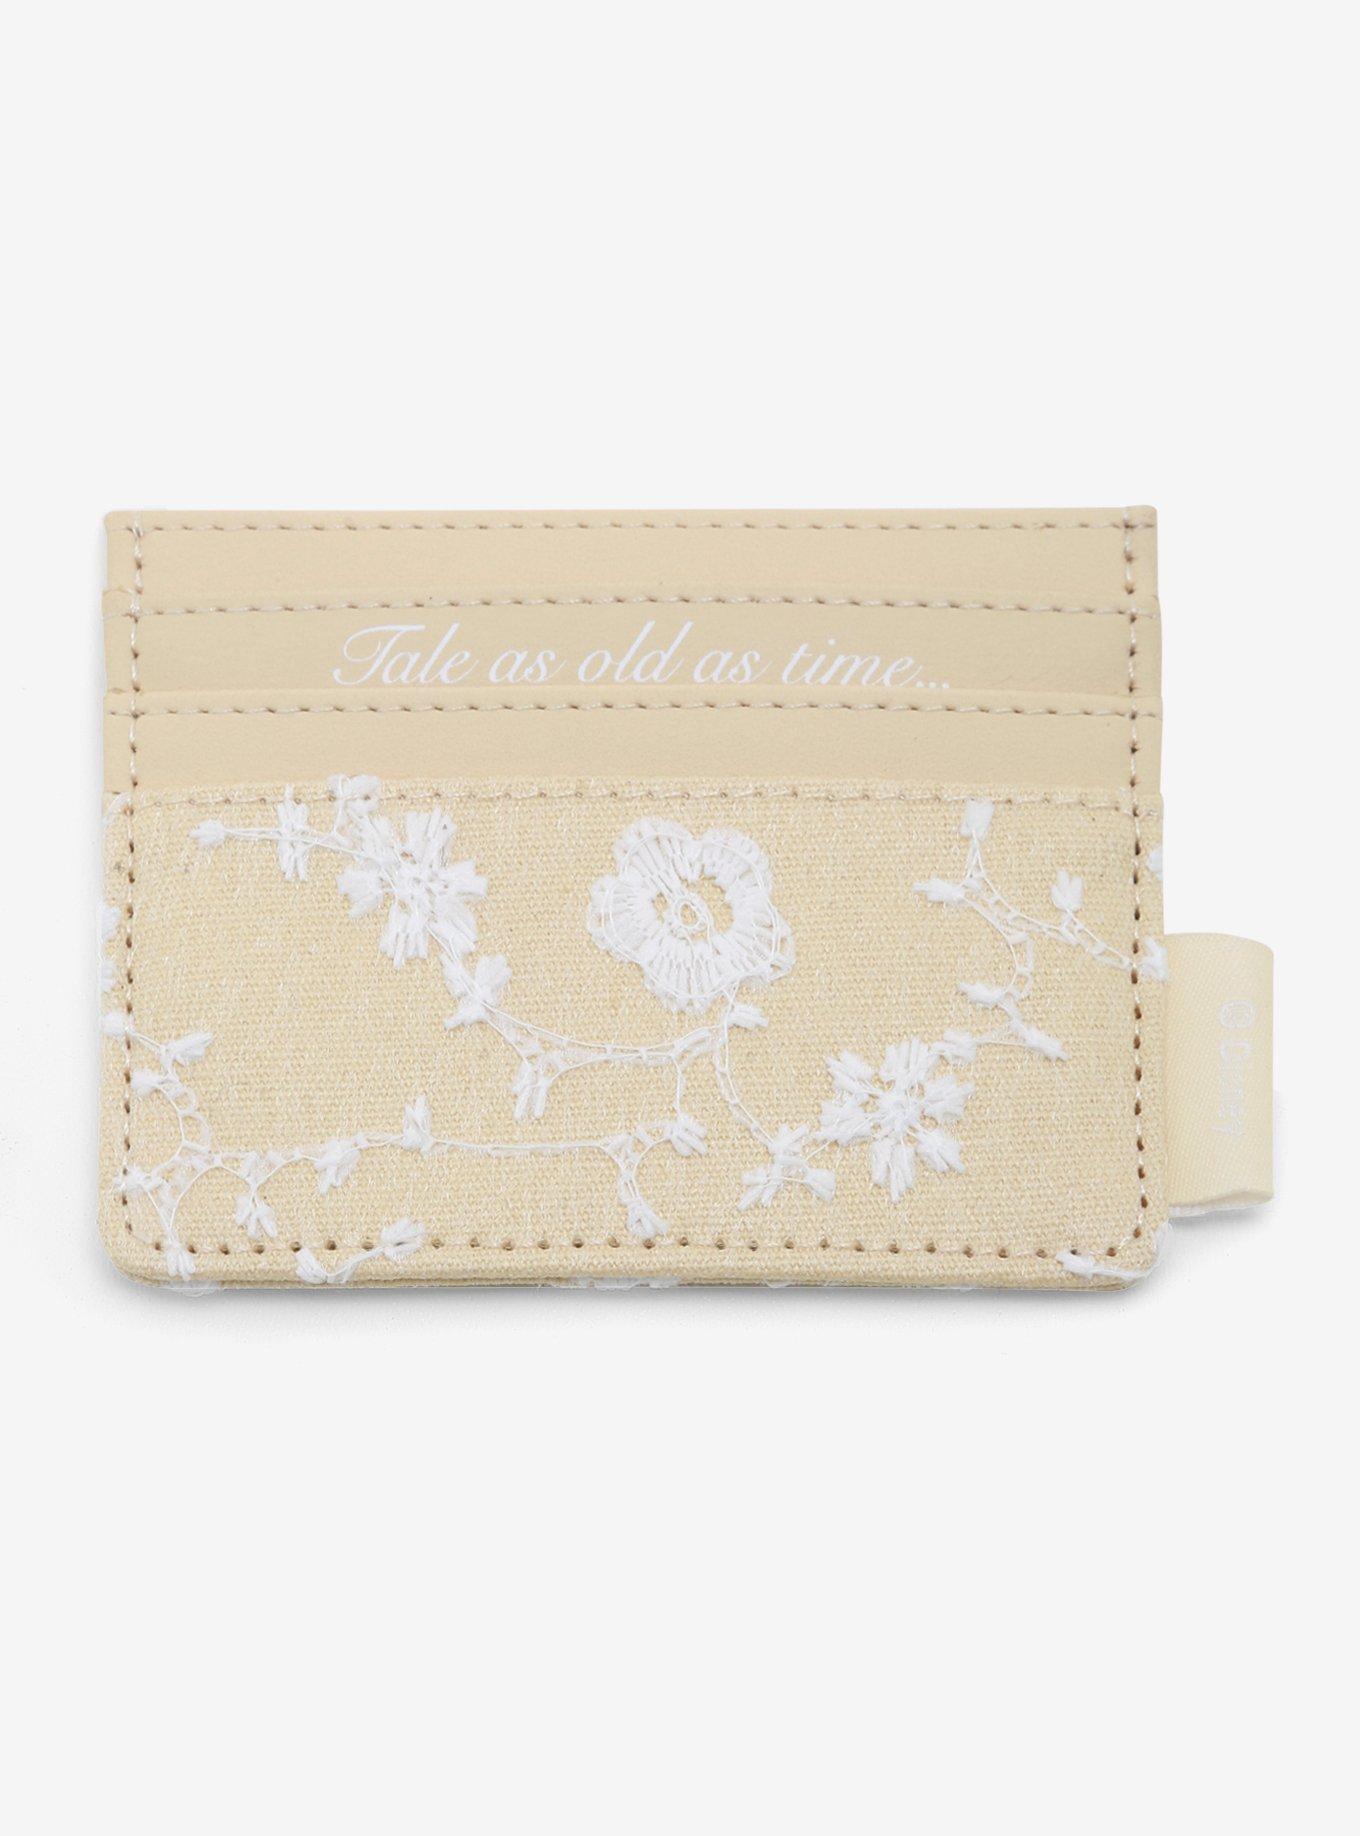 Loungefly Disney Beauty and the Beast Lace Cardholder - BoxLunch Exclusive, , alternate